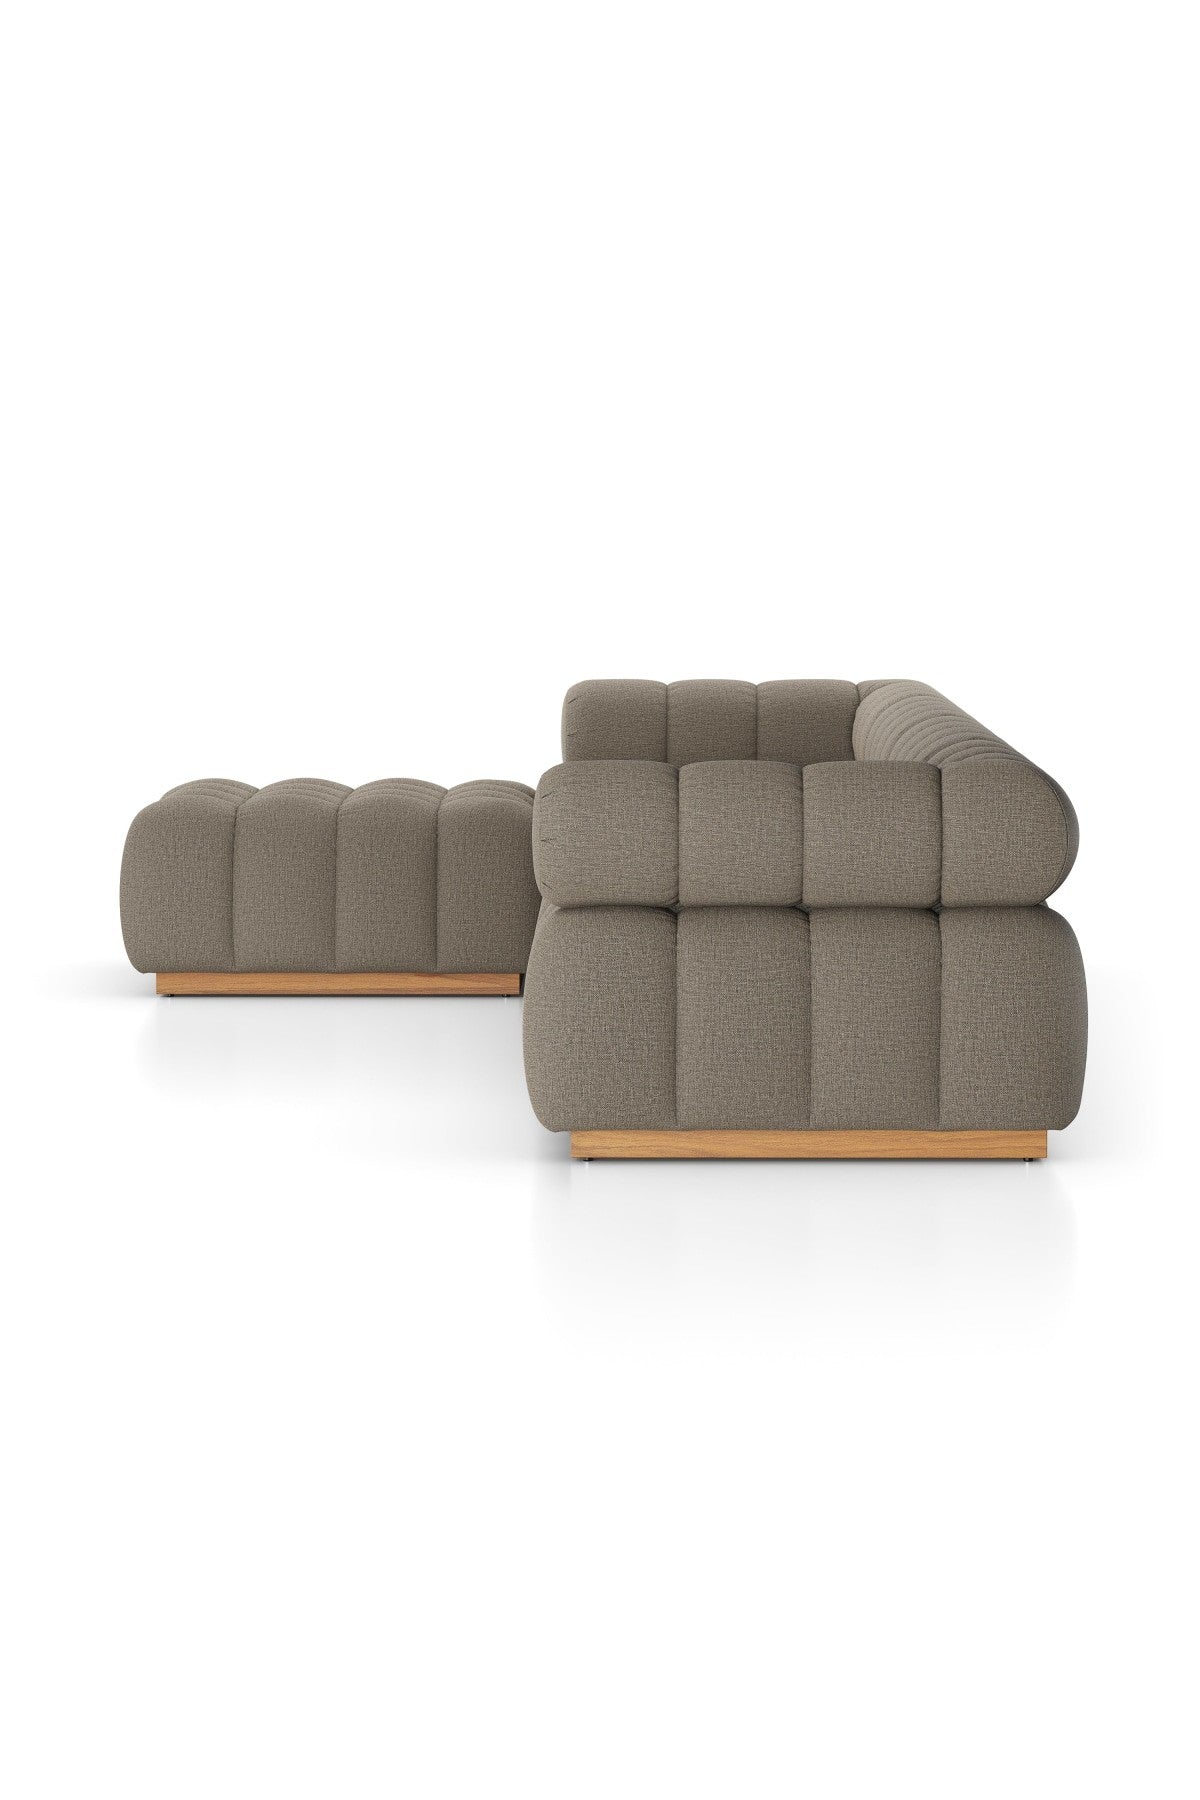 Havana Outdoor 4-Piece Sectional with Ottoman